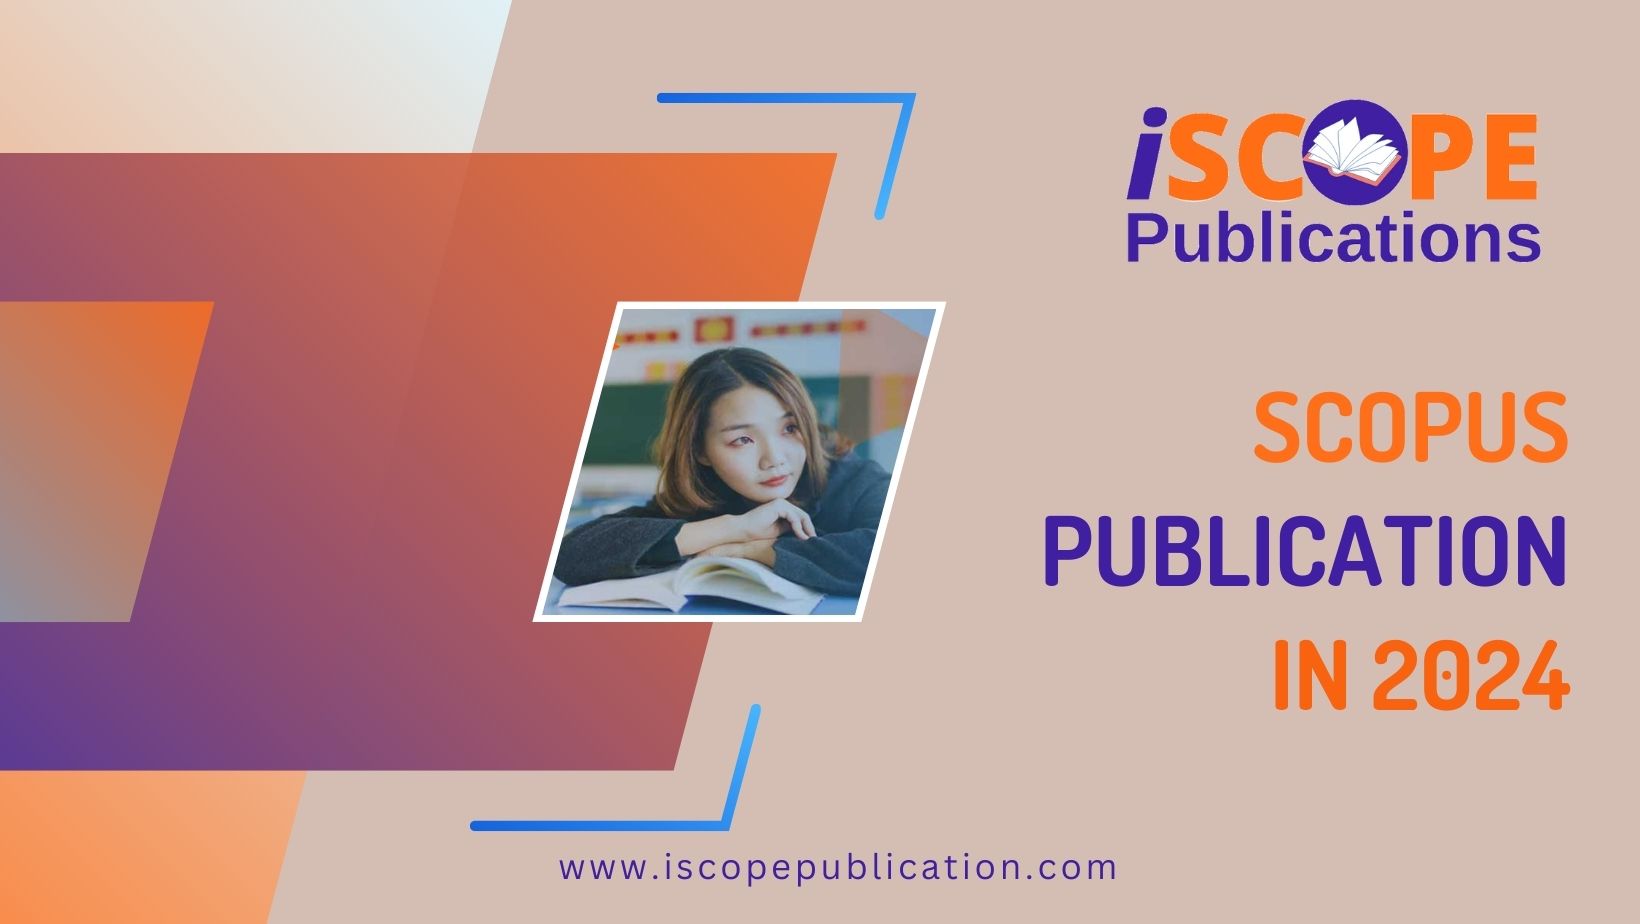 Top International Conferences Offering Scopus Publication in 2024